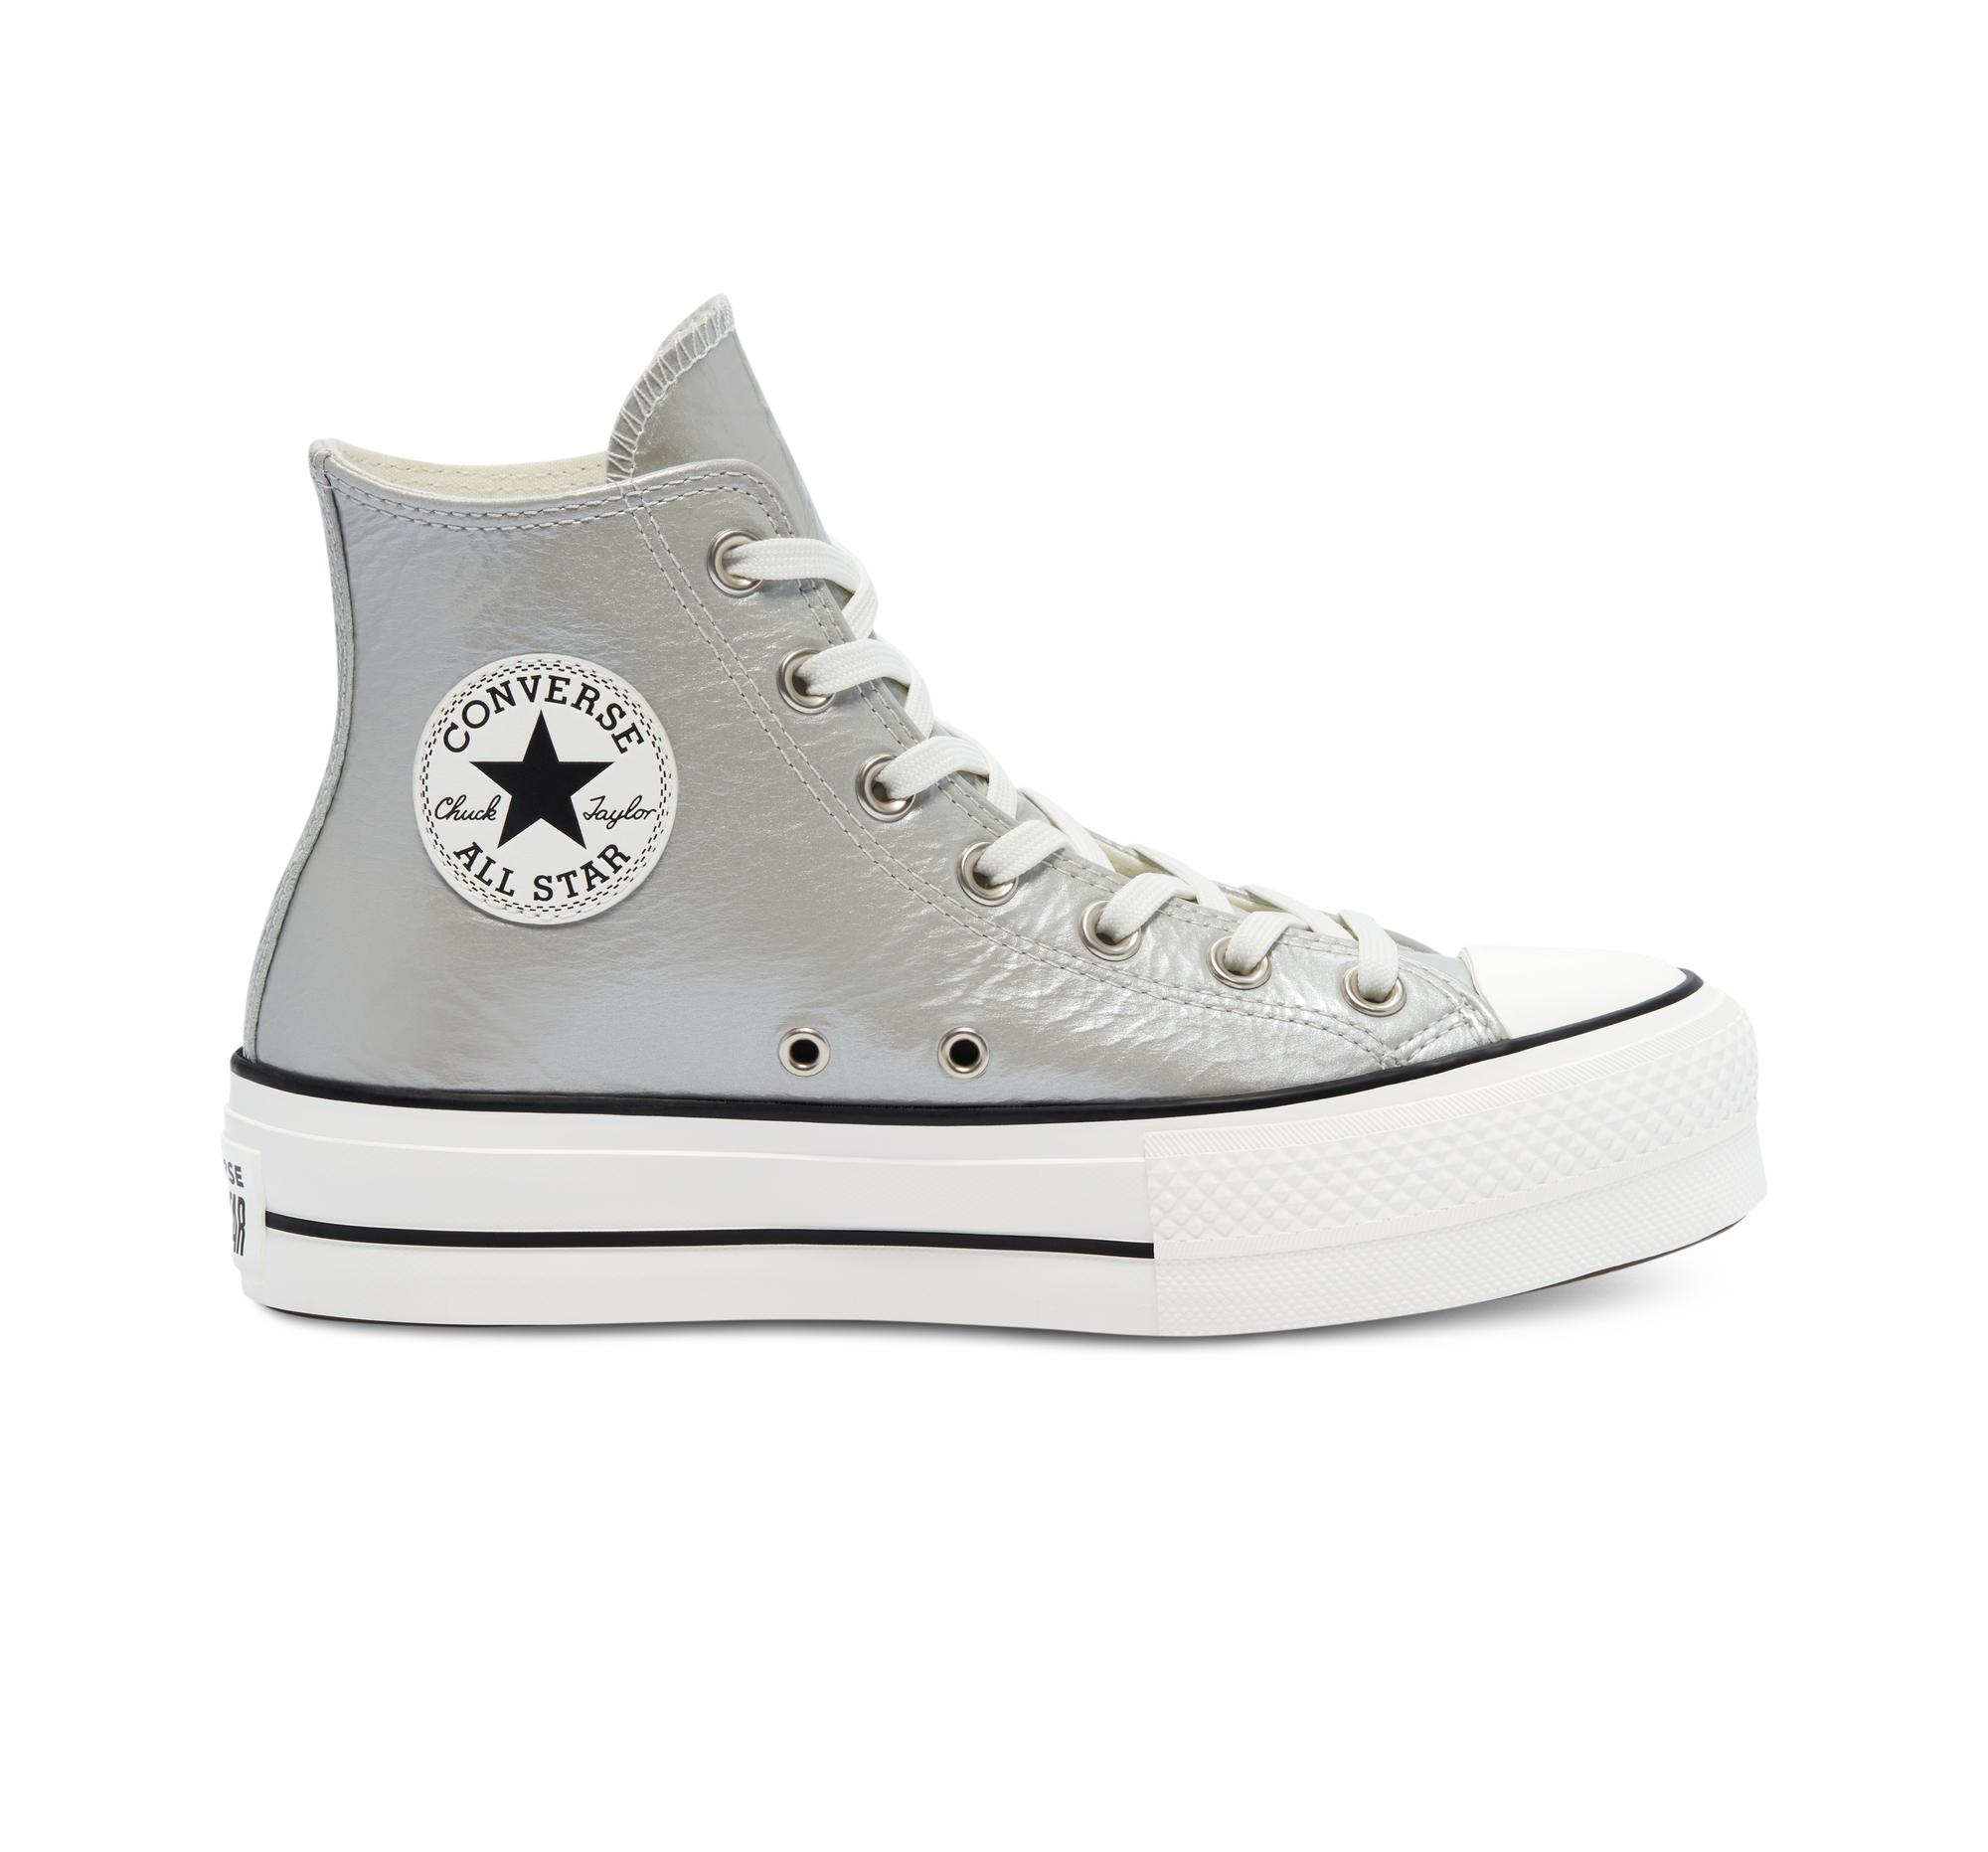 Converse Rubber Chuck Taylor All Star Hi Lift Sneakers in Silver ... سلمى